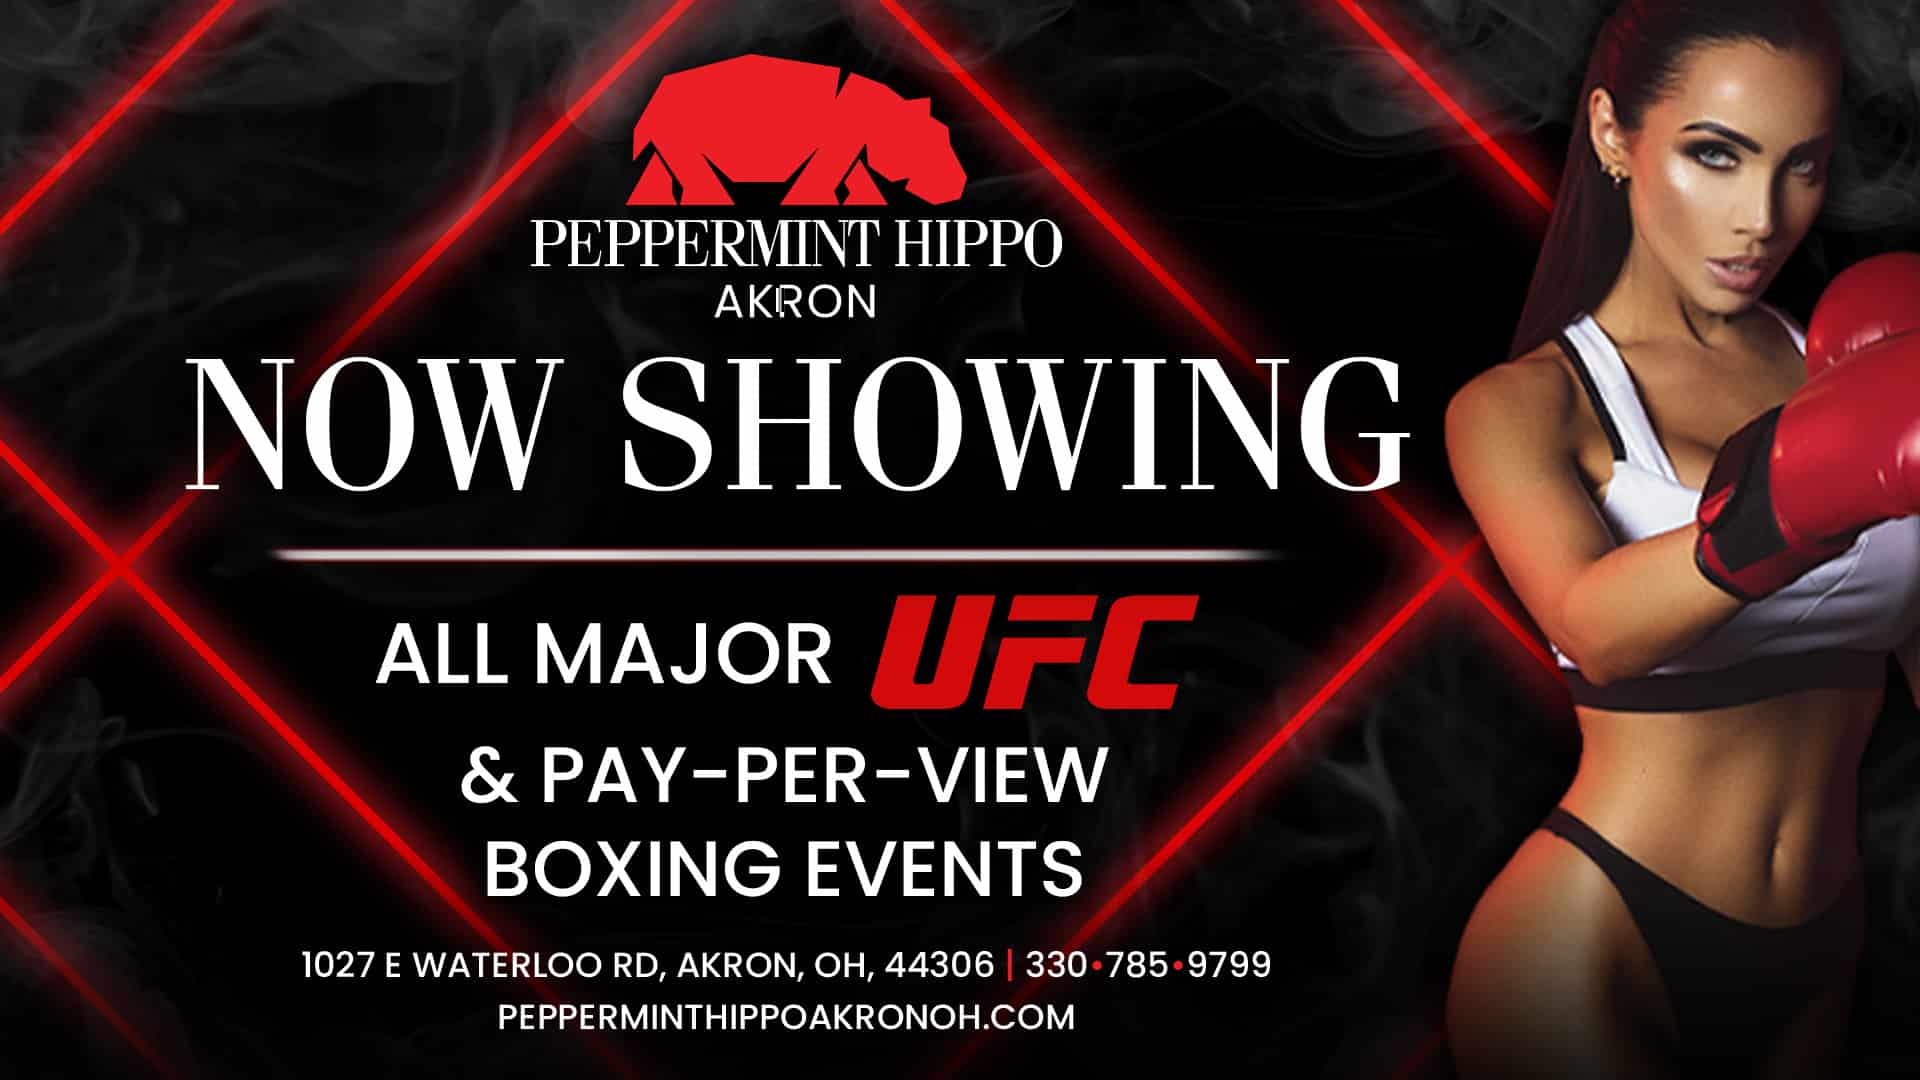 Now showing all major UFC events at Peppermint Hippo Akron